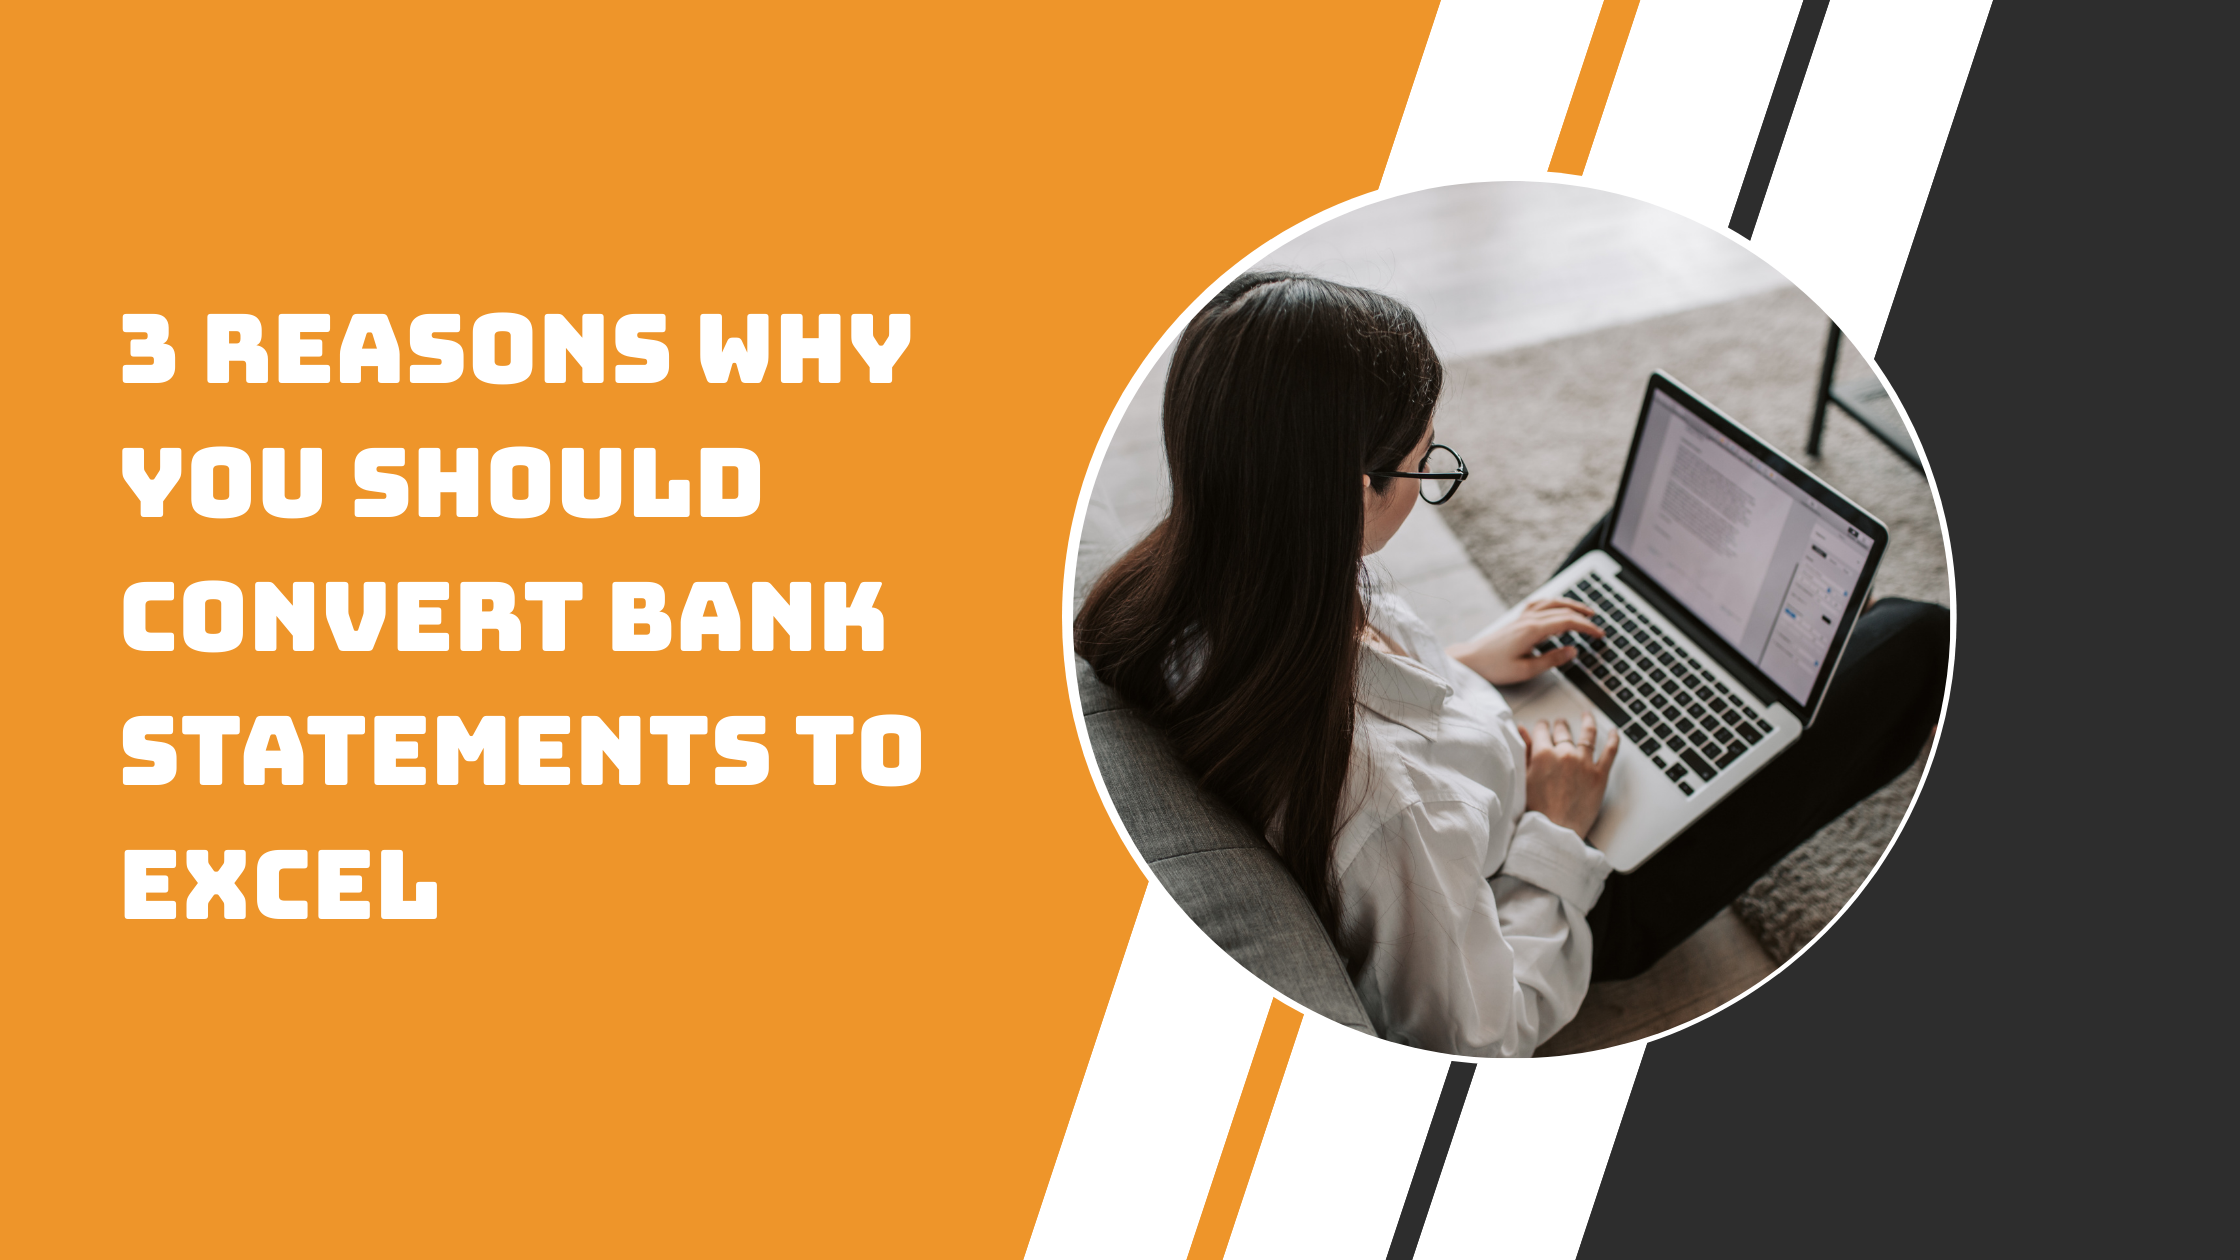 3 Reasons Why You Should Convert Bank Statements to Excel